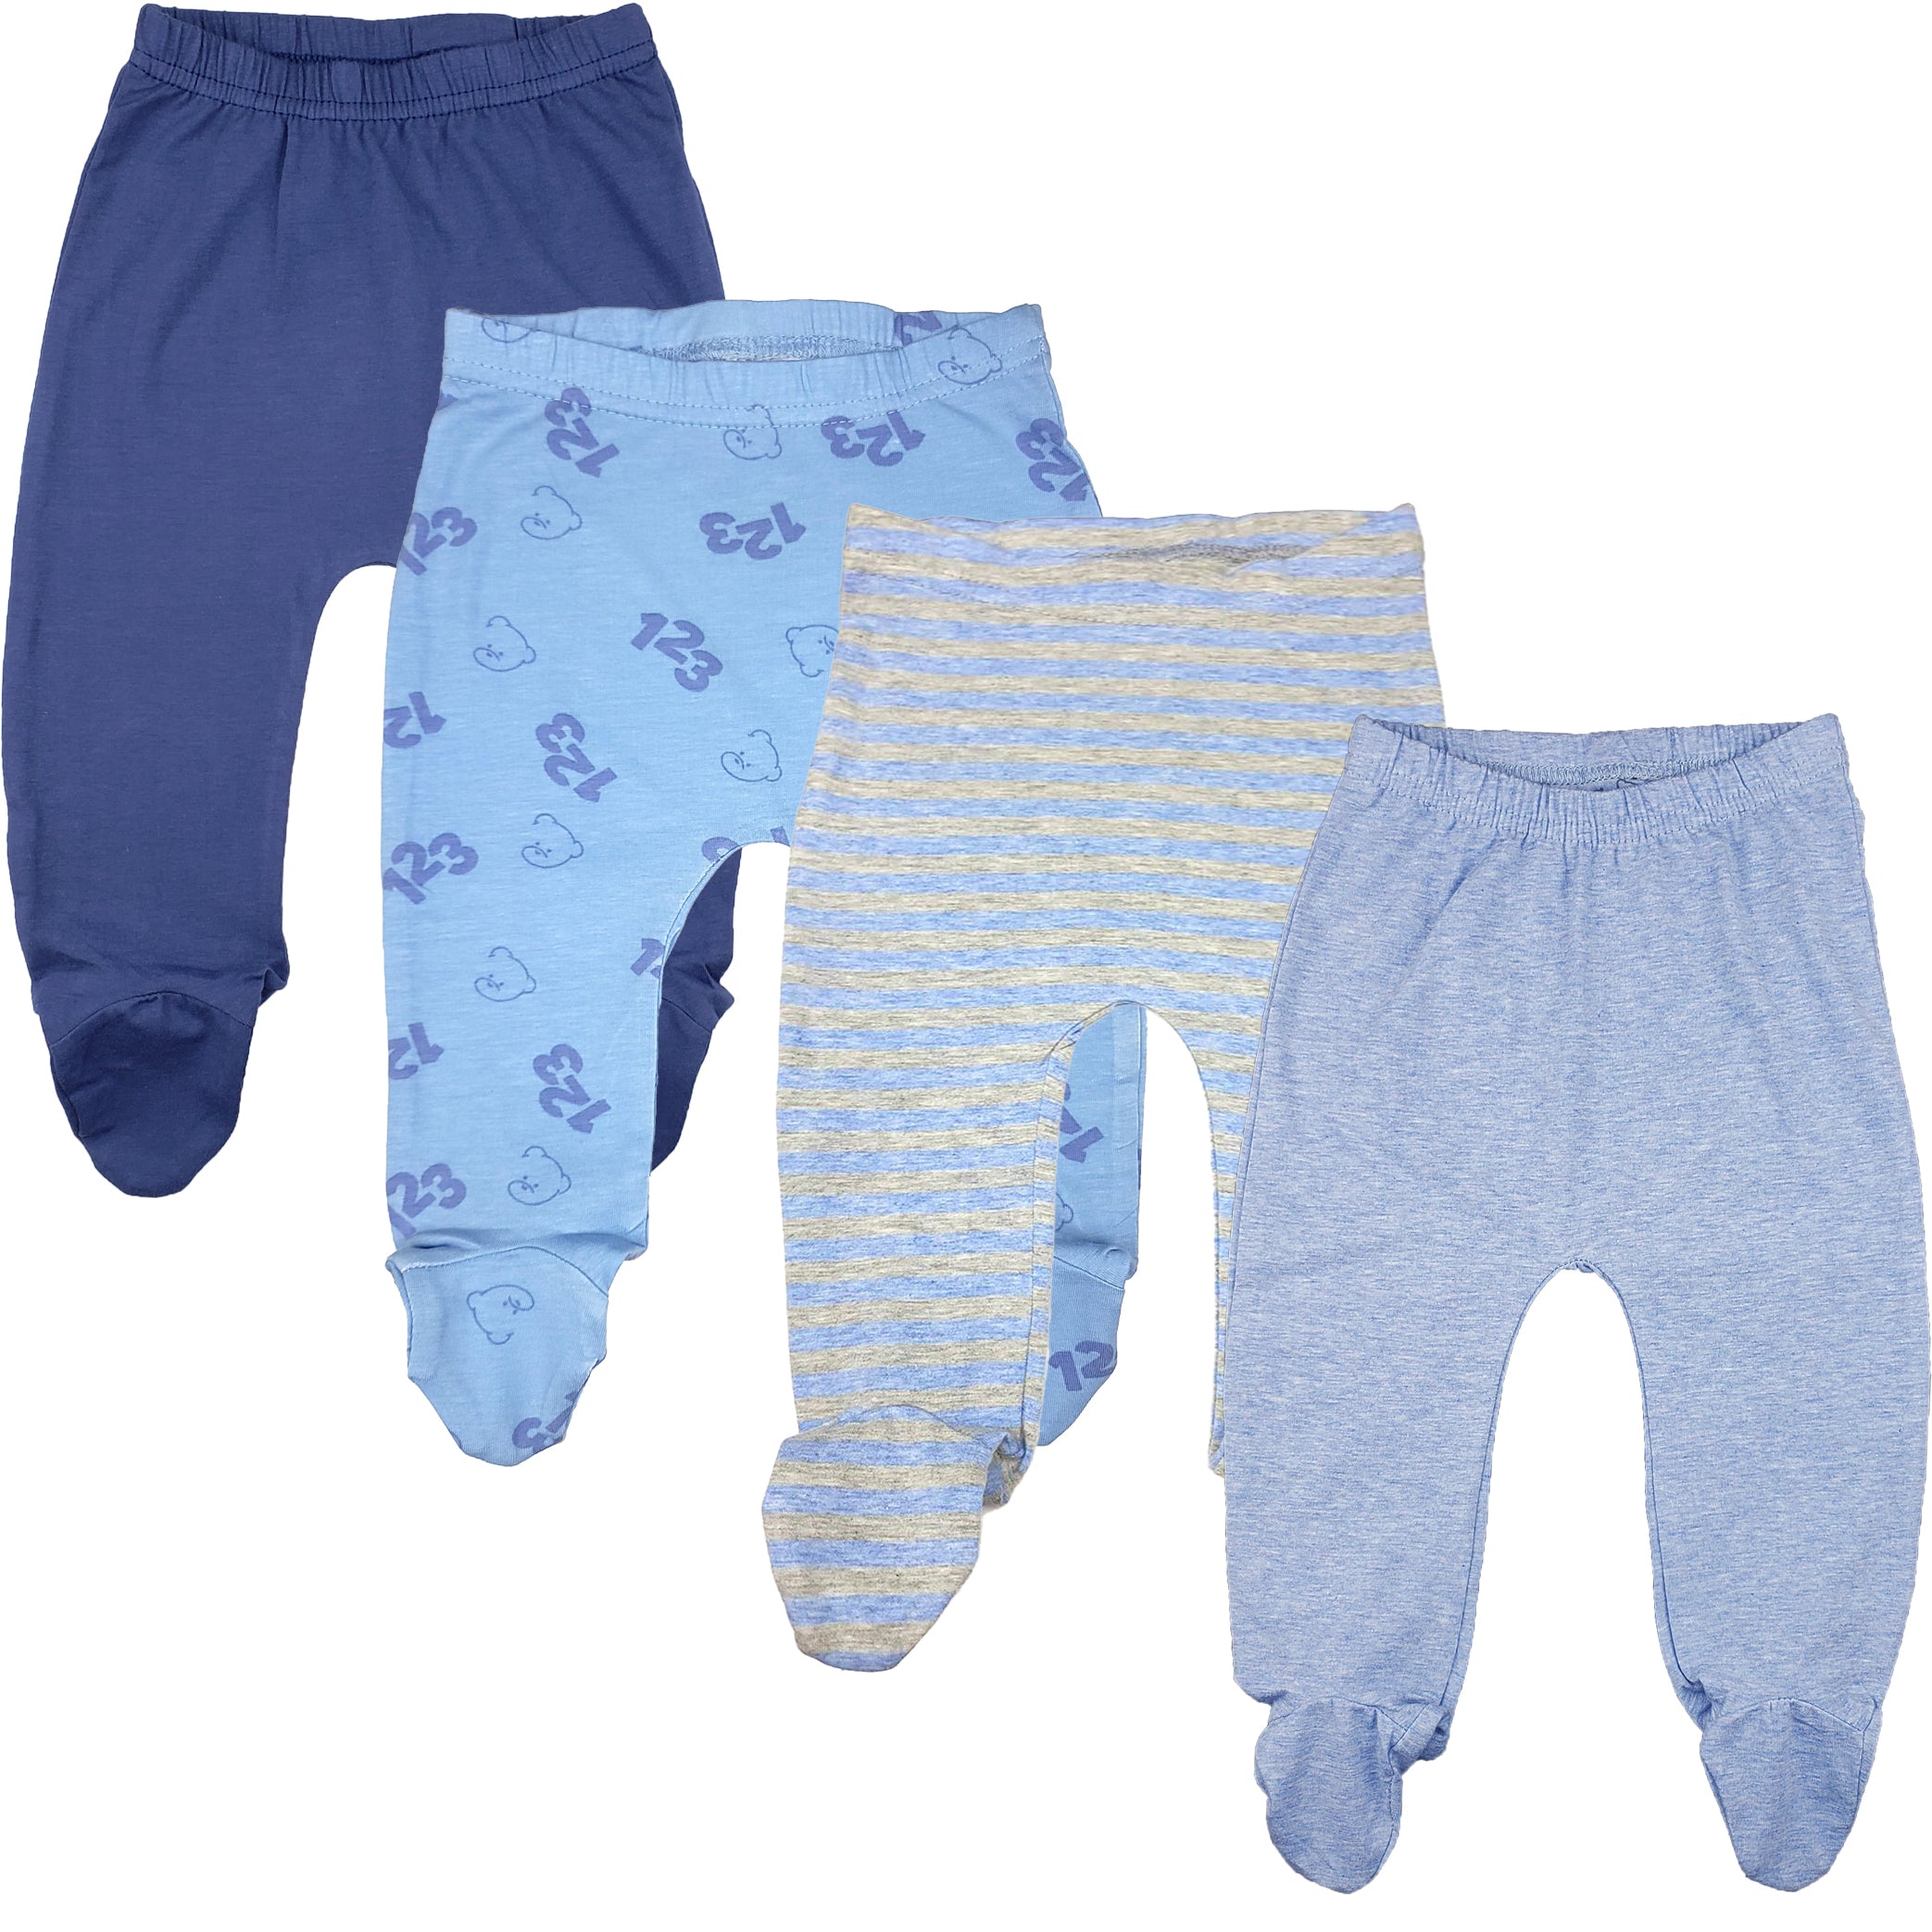 123 Bear Cotton Spandex Baby Pants with feet / Baby leggings with footies